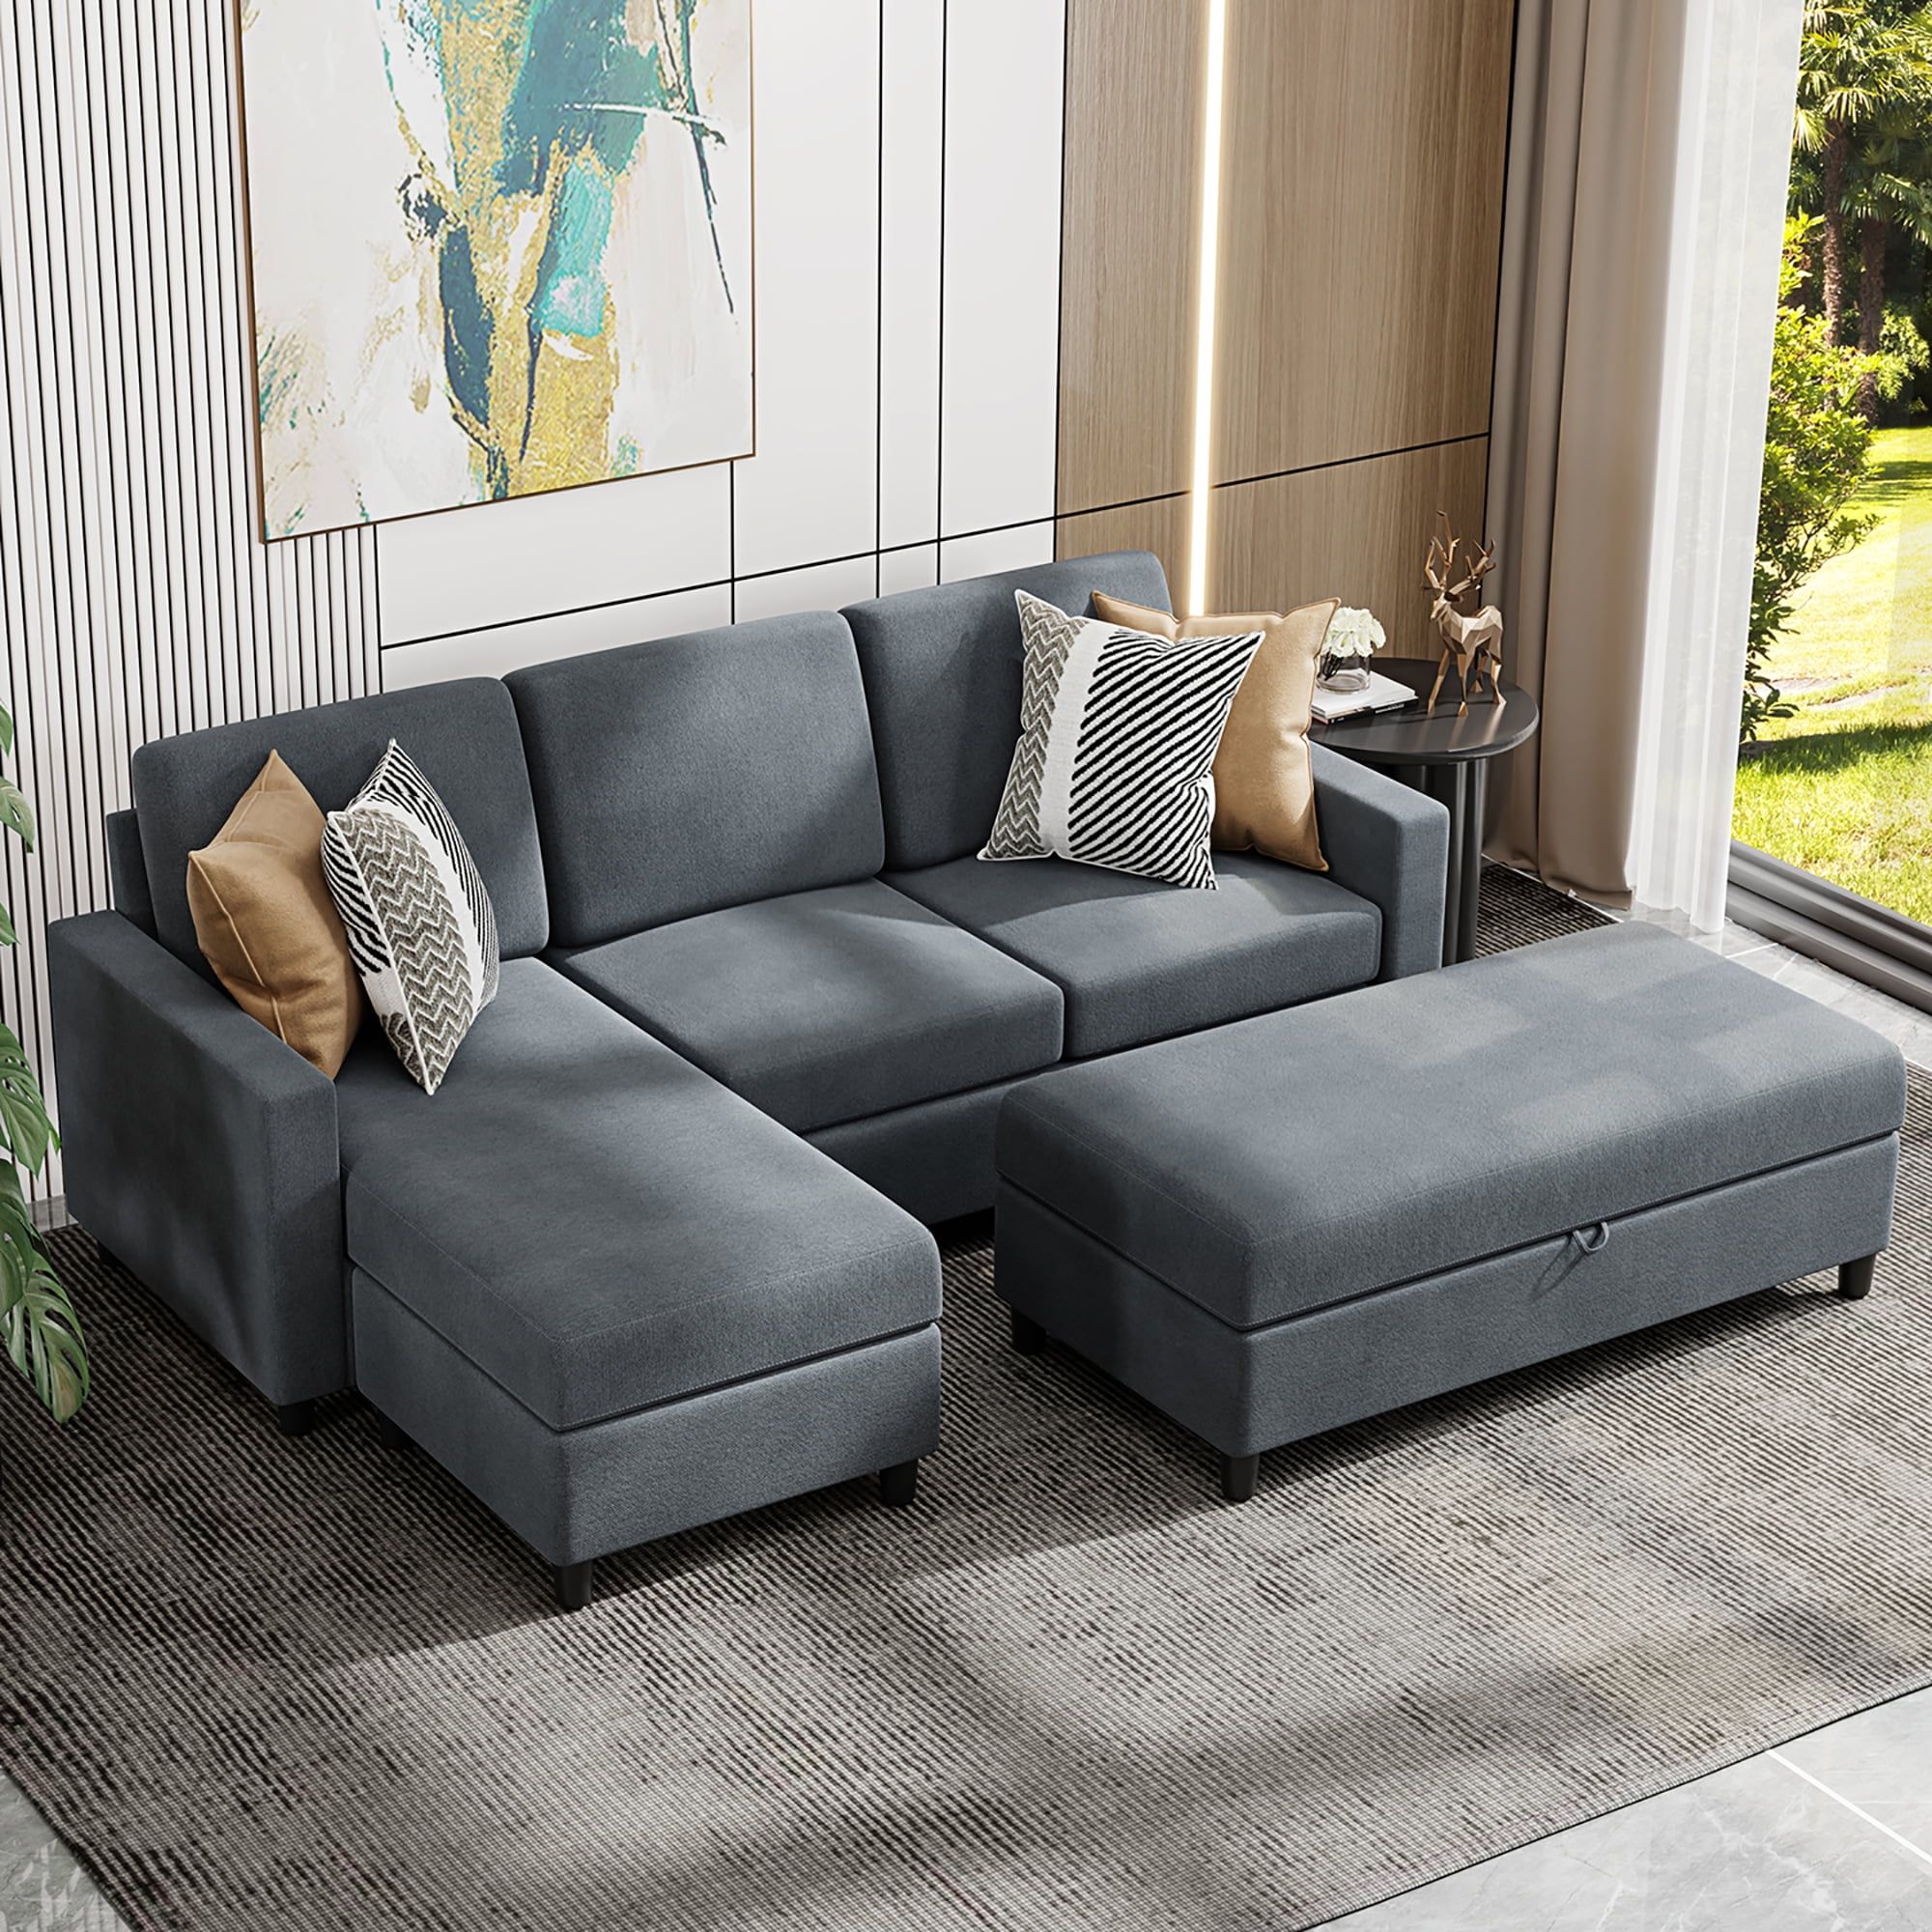 Convertible Sectional Sofa Couch With Storage Ottoman, L Shaped Wide Reversible  Chaise With Linen Fabric(charcoal Grey) – Walmart In L Shape Couches With Reversible Chaises (Photo 1 of 15)